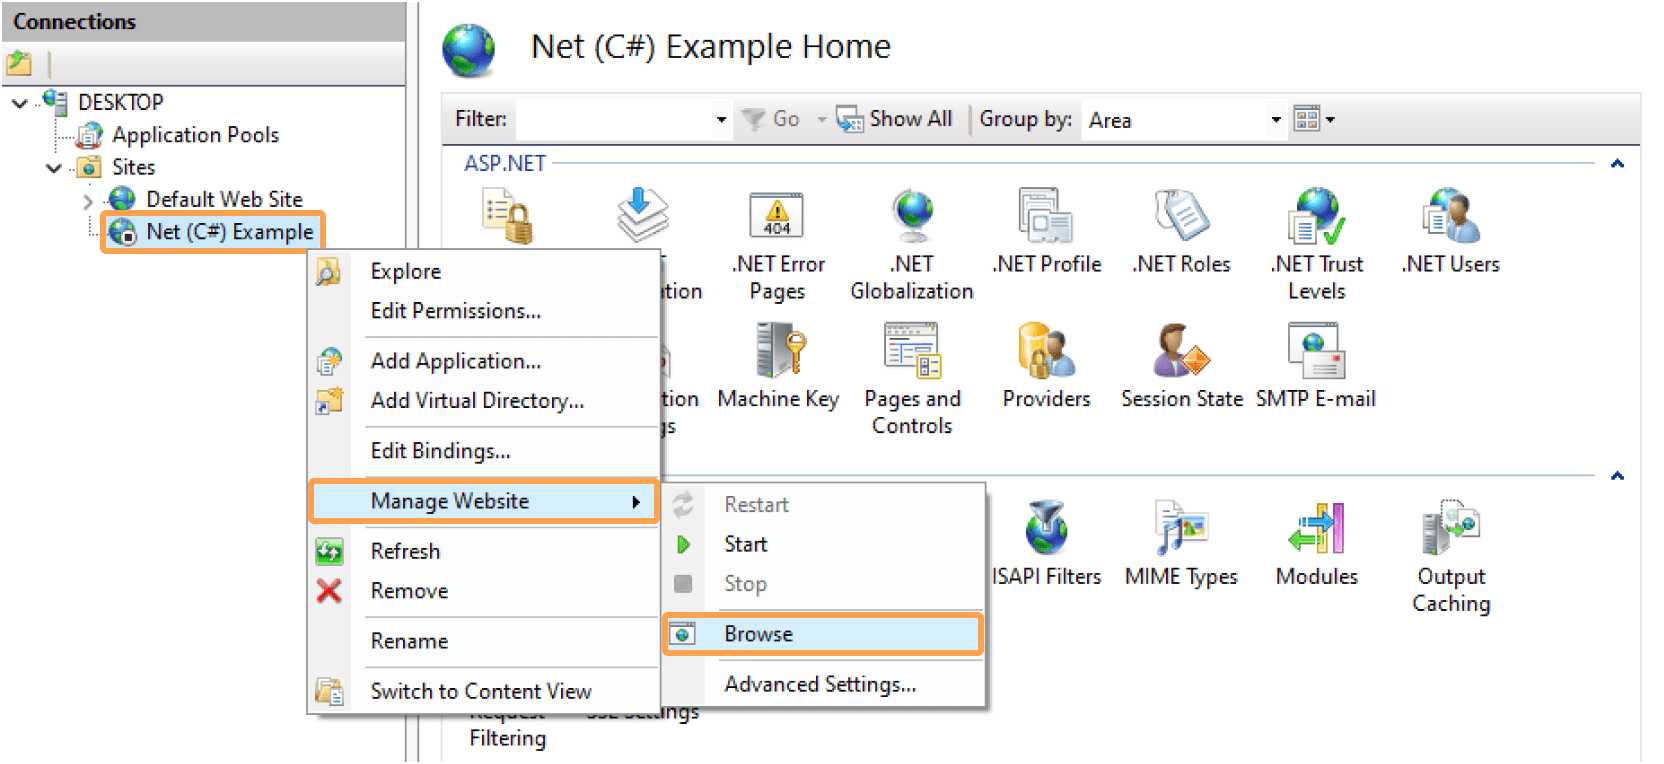 How to integrate ONLYOFFICE Document Builder into your application on .Net (C#)